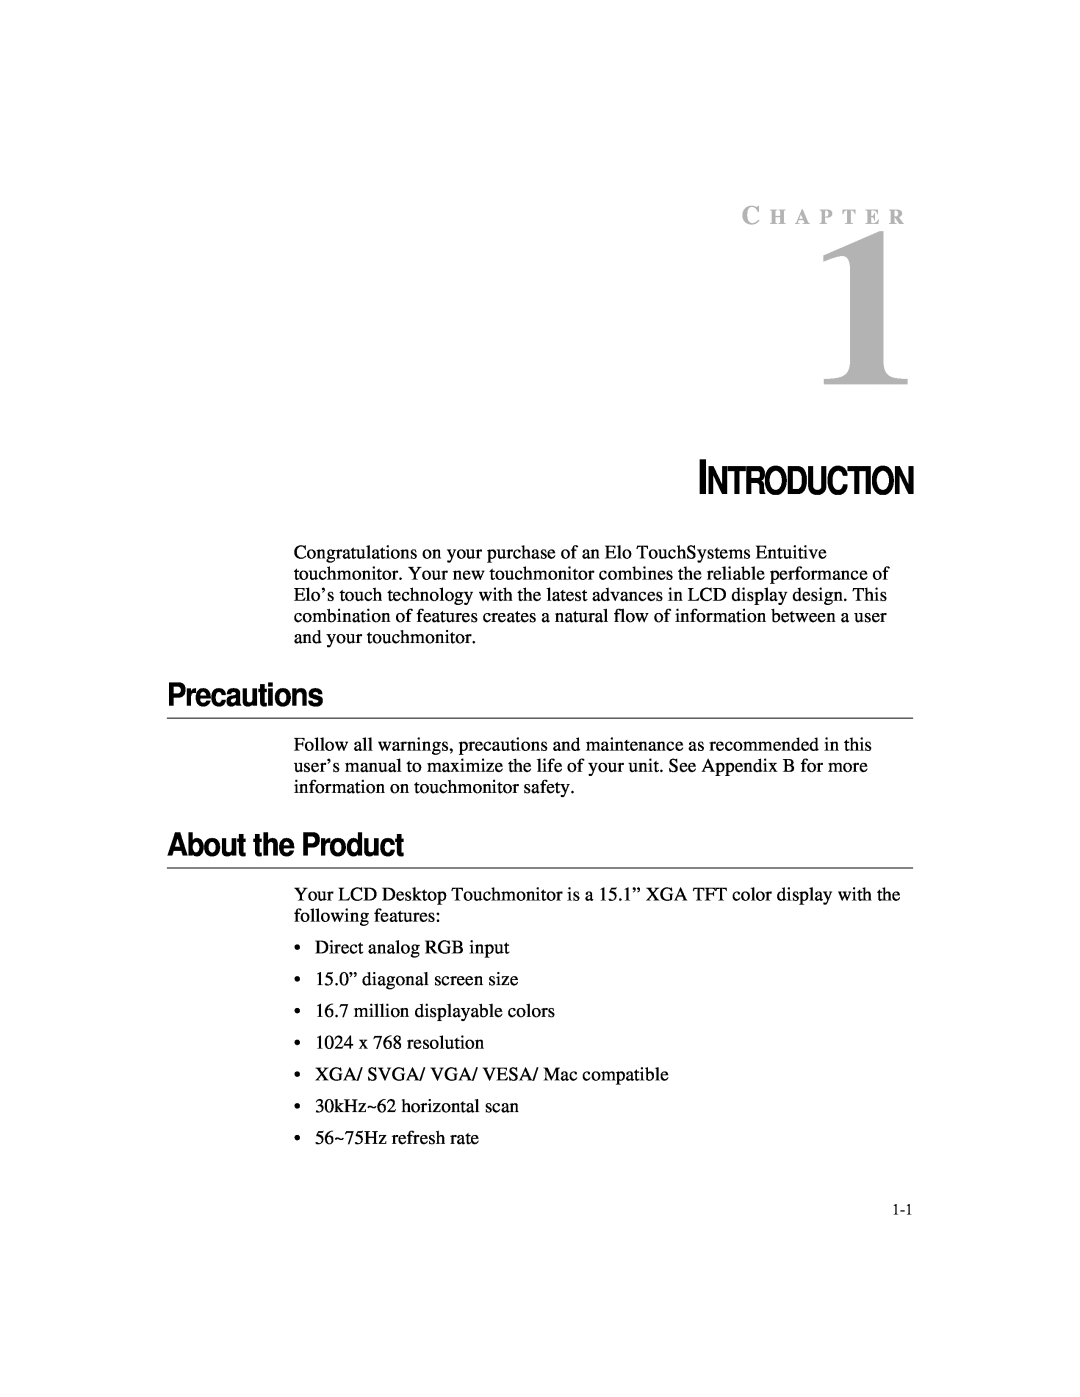 Elo TouchSystems 1525L manual Introduction, Precautions, About the Product, C H A P T E R 